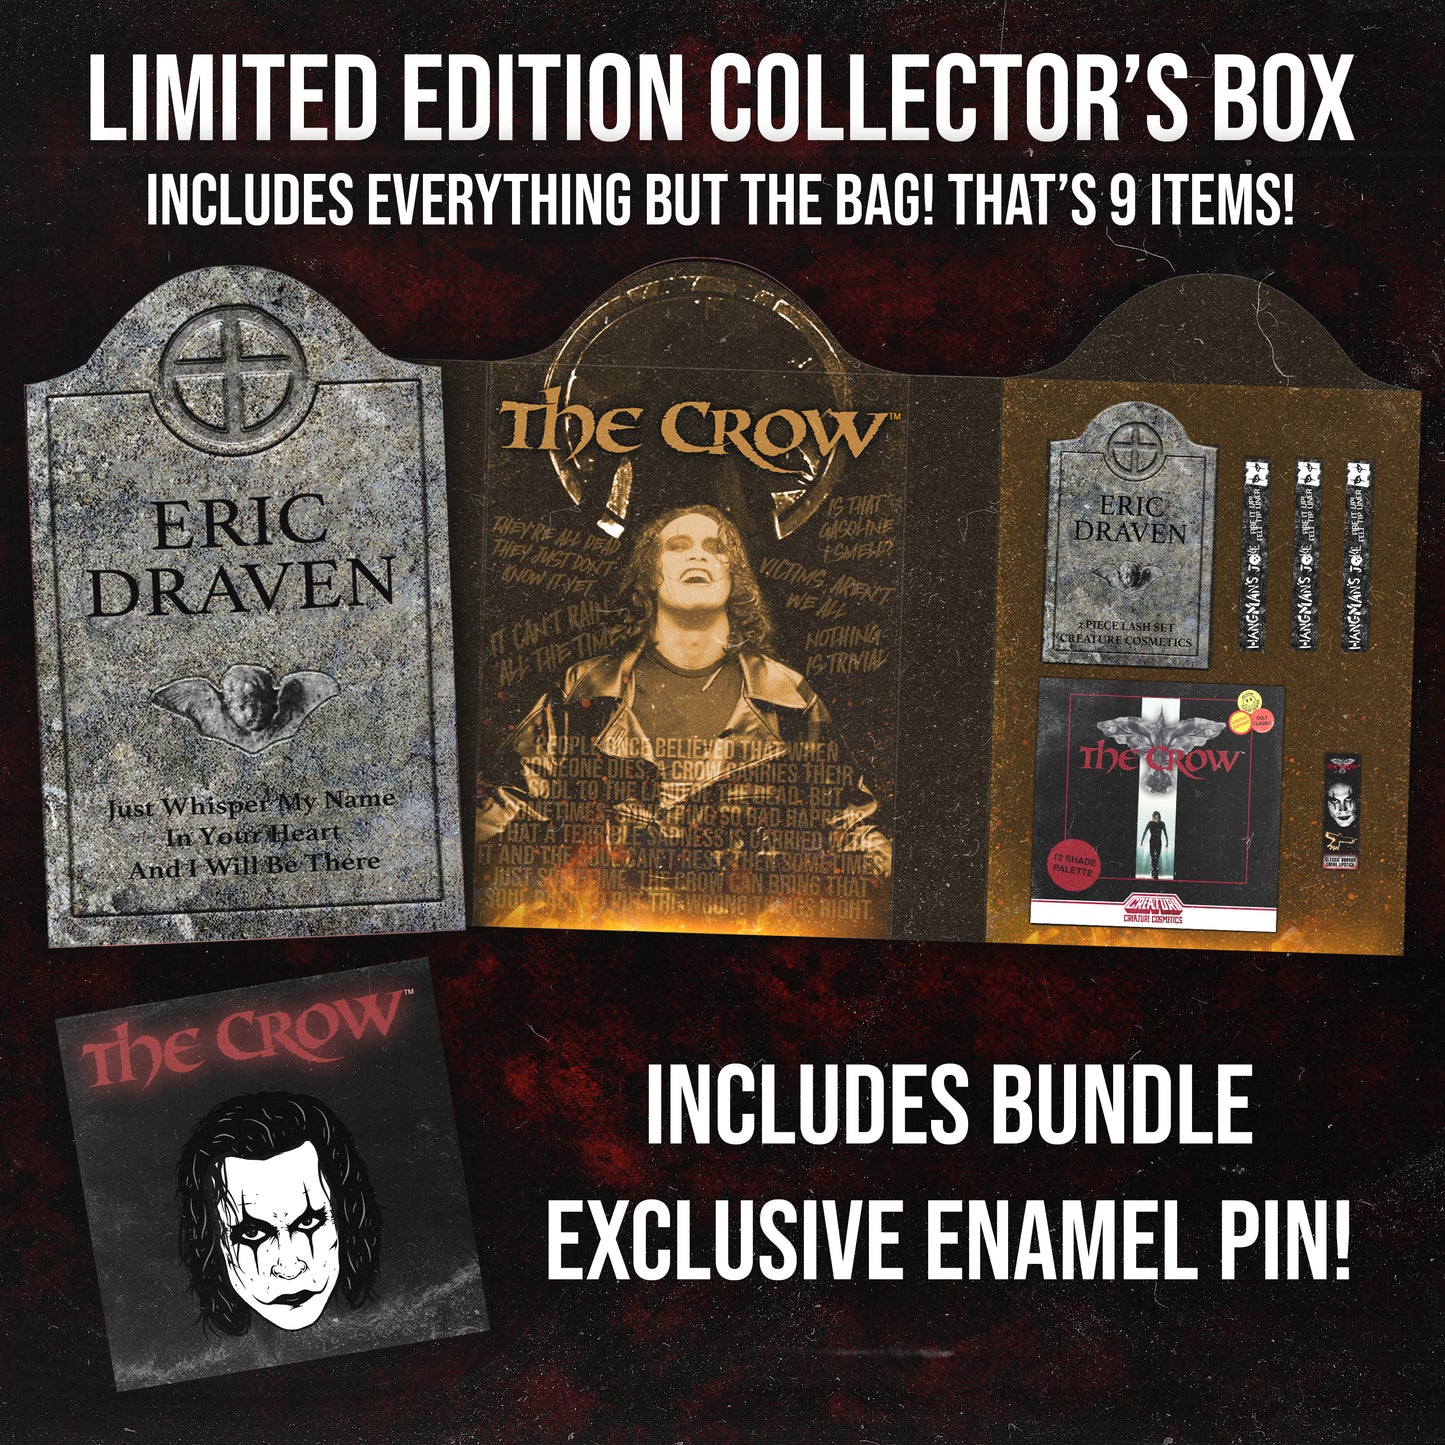 THE CROW LIMITED EDITION COLLECTOR'S BOX